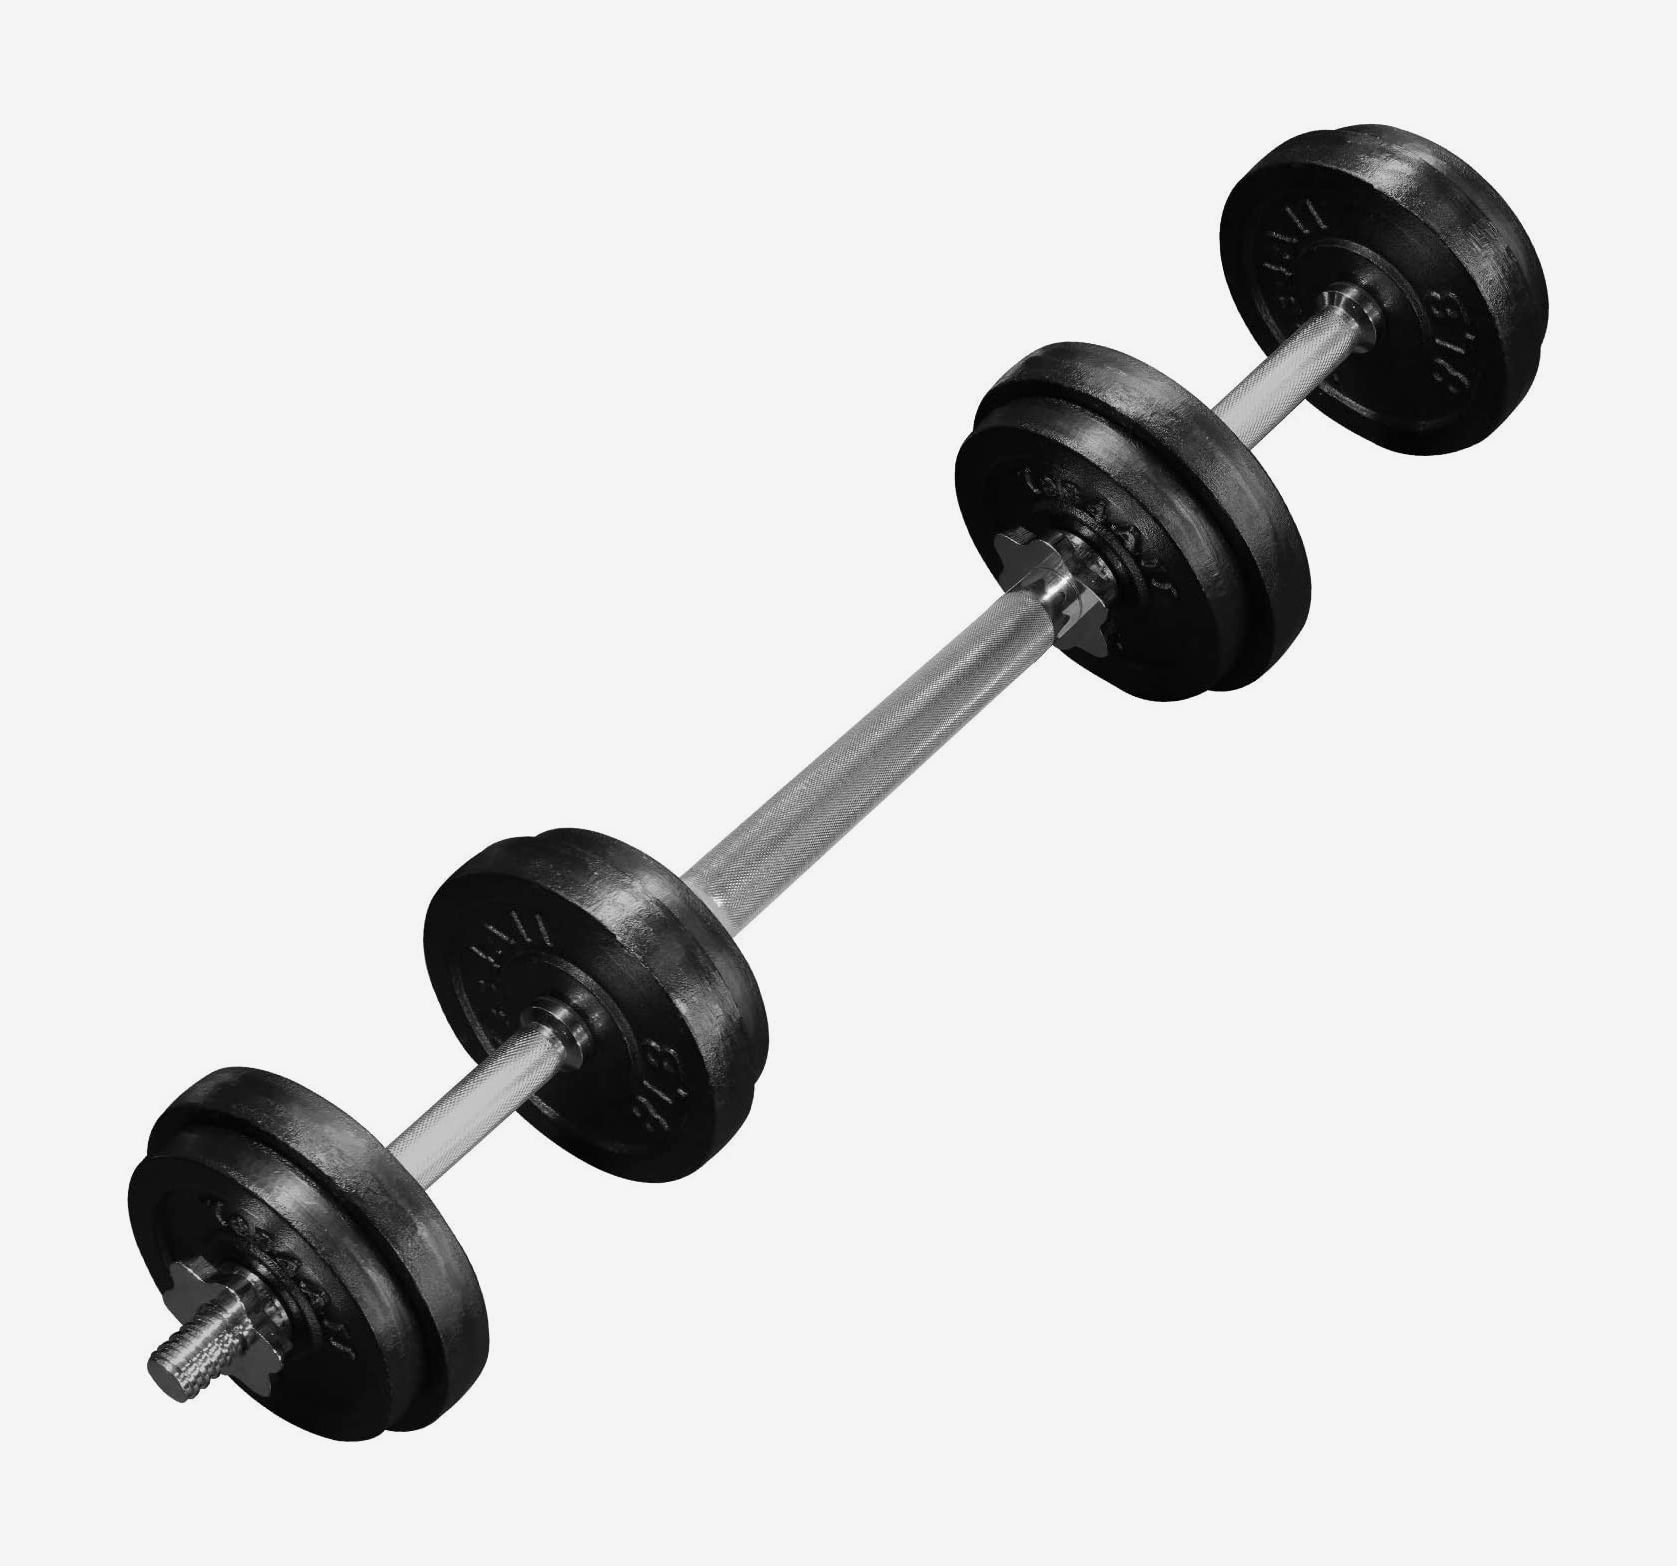 Barbell 3 in 1 Strength Training Equipment XINYI Adjustable Dumbbell Set Home Gym Free Weights Lifting,Bench Press Dumbells